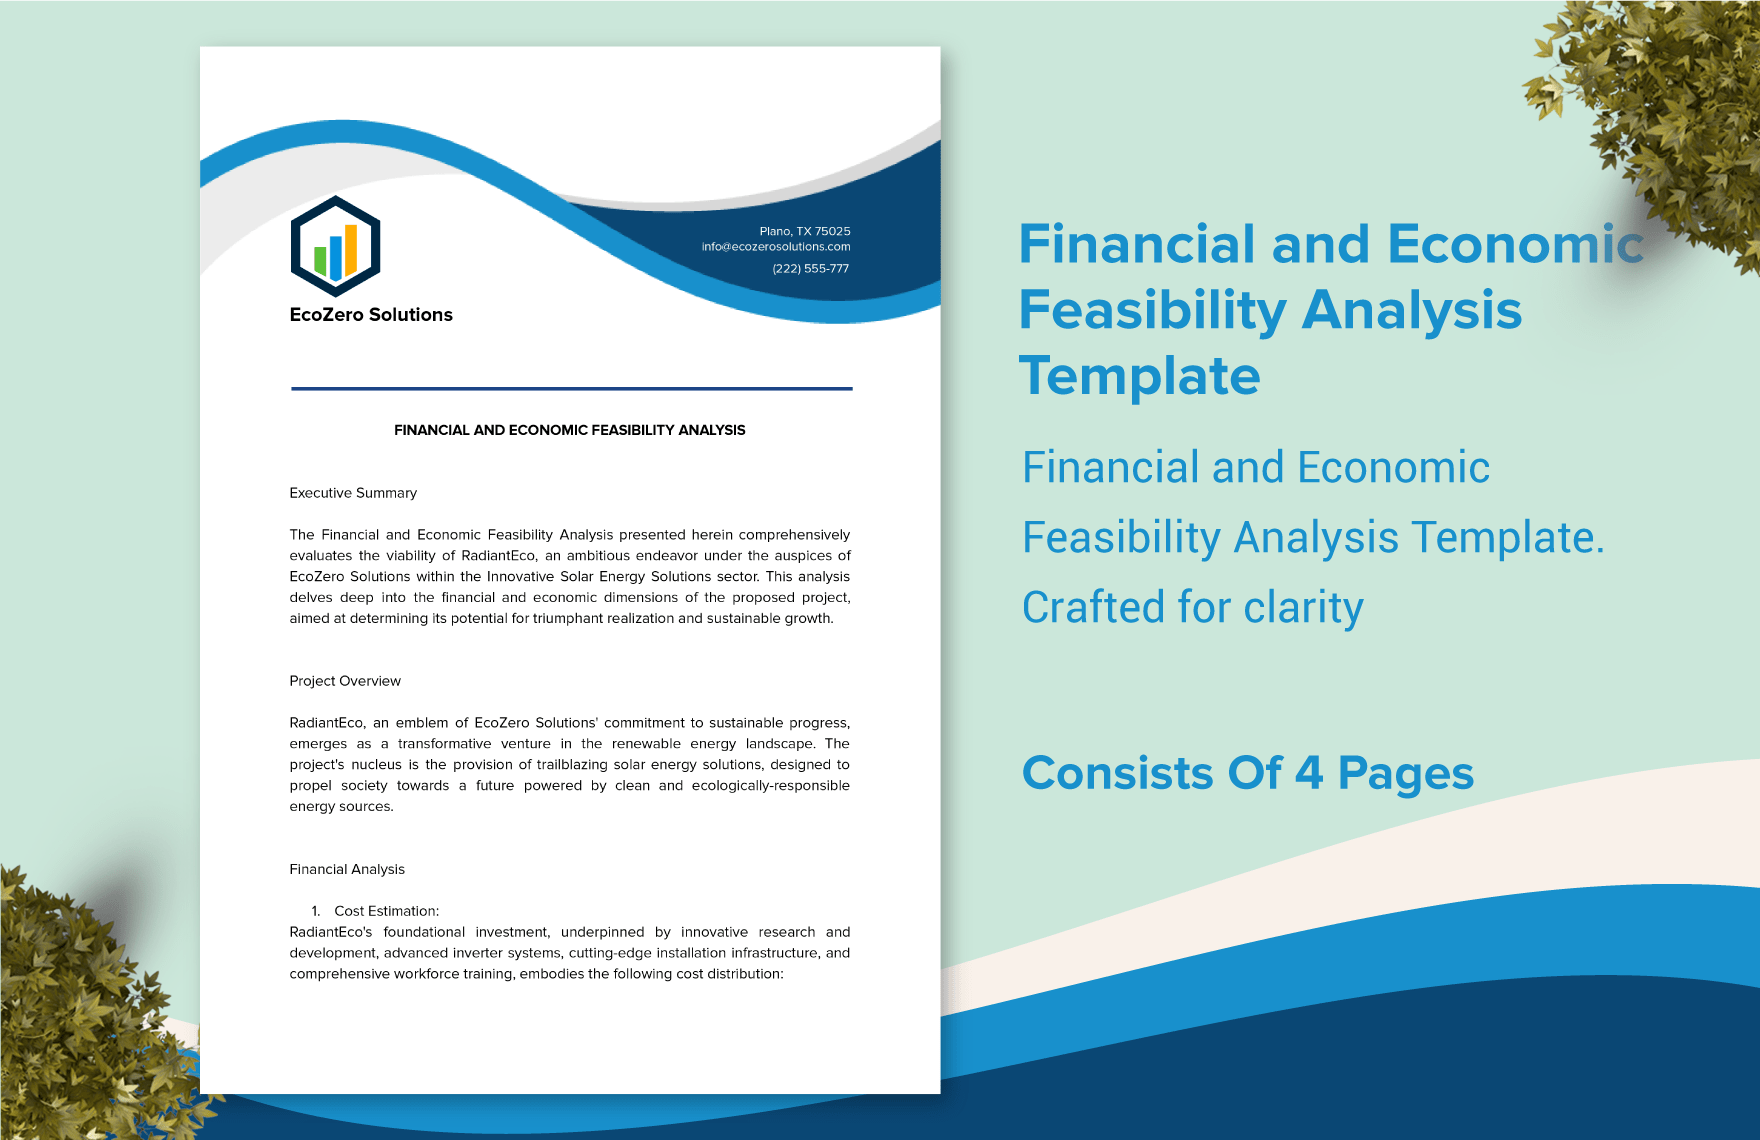 Financial and Economic Feasibility Analysis Template